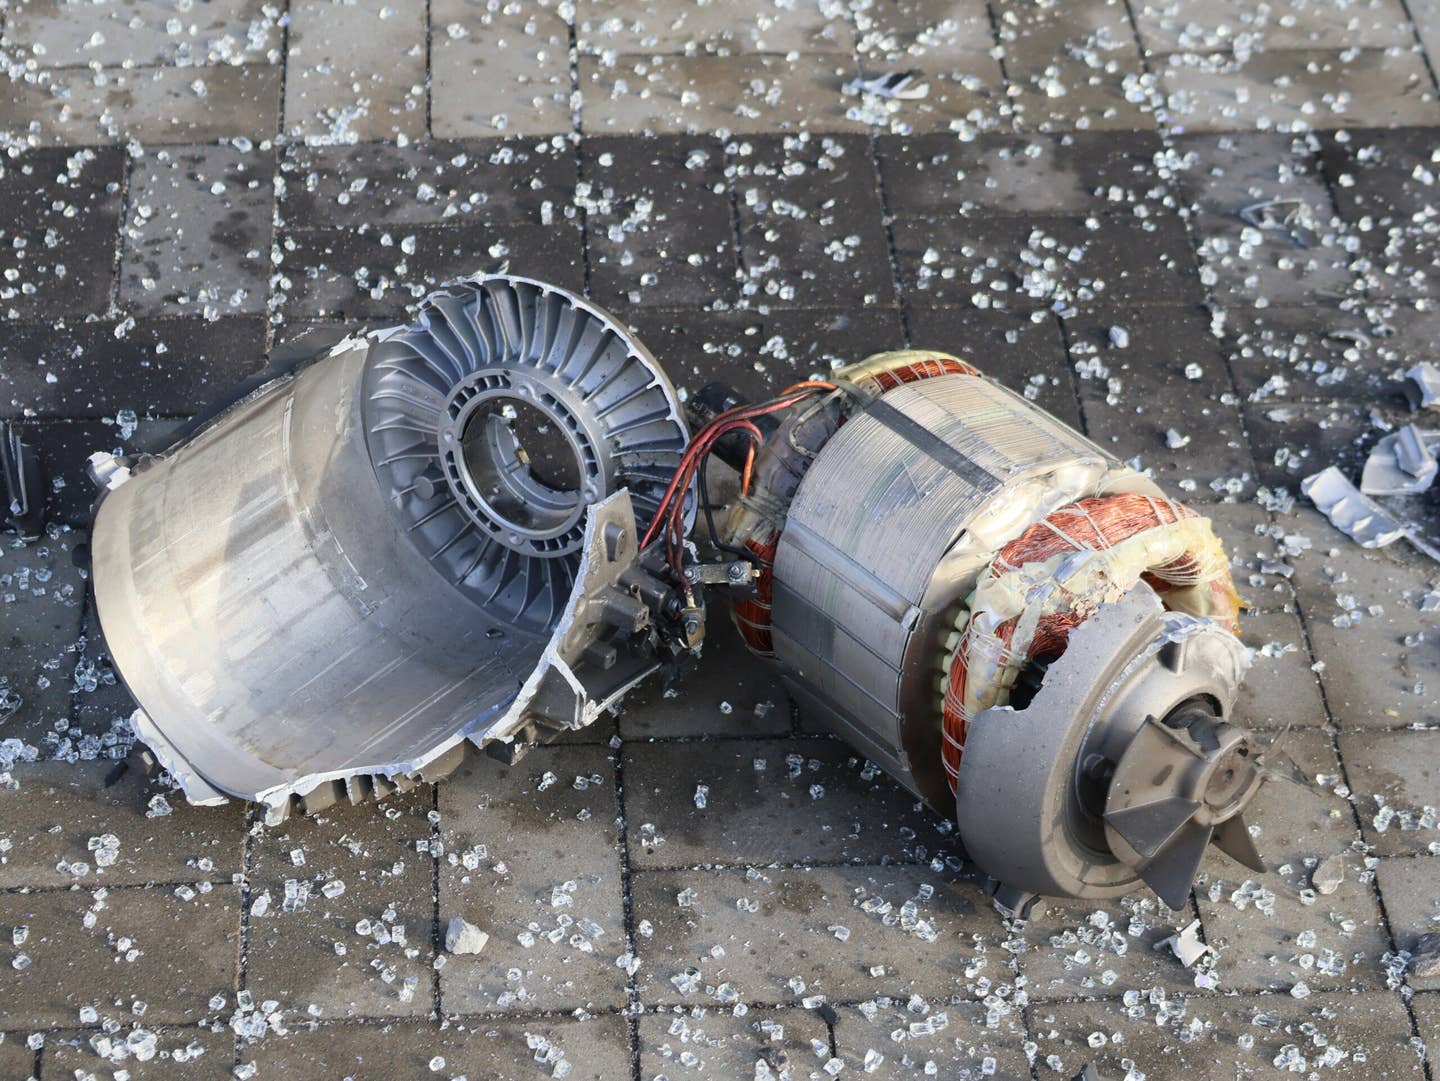 Downed debris, apparently from a cruise missile’s turbine engine, lies near Lukianivska subway station in Kyiv, Ukraine, on December 29, 2023. <em>Photo by Roman Petushkov/Global Images Ukraine via Getty Images</em>